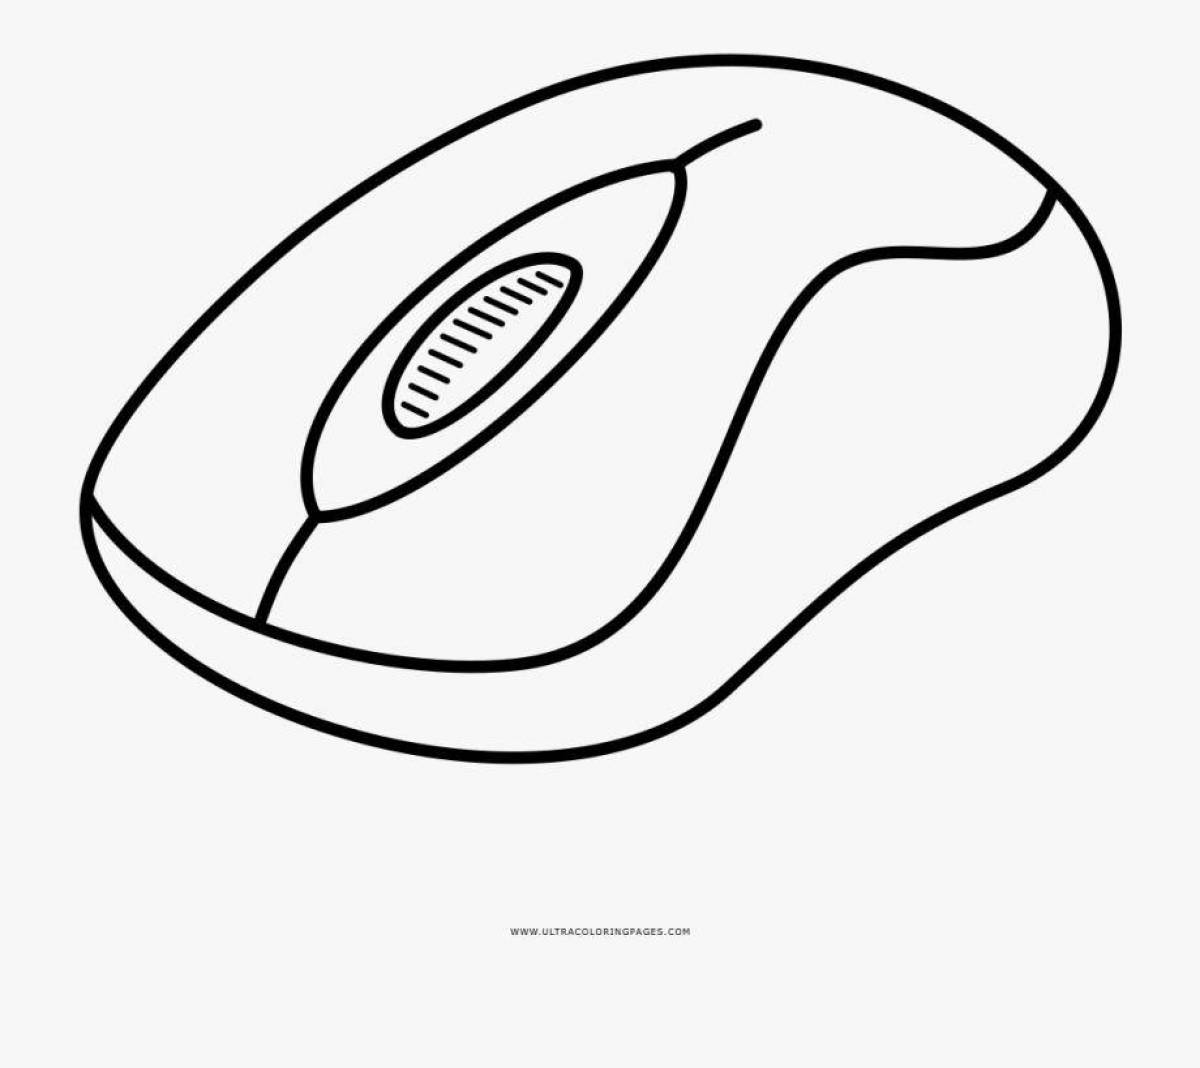 Computer mouse #16